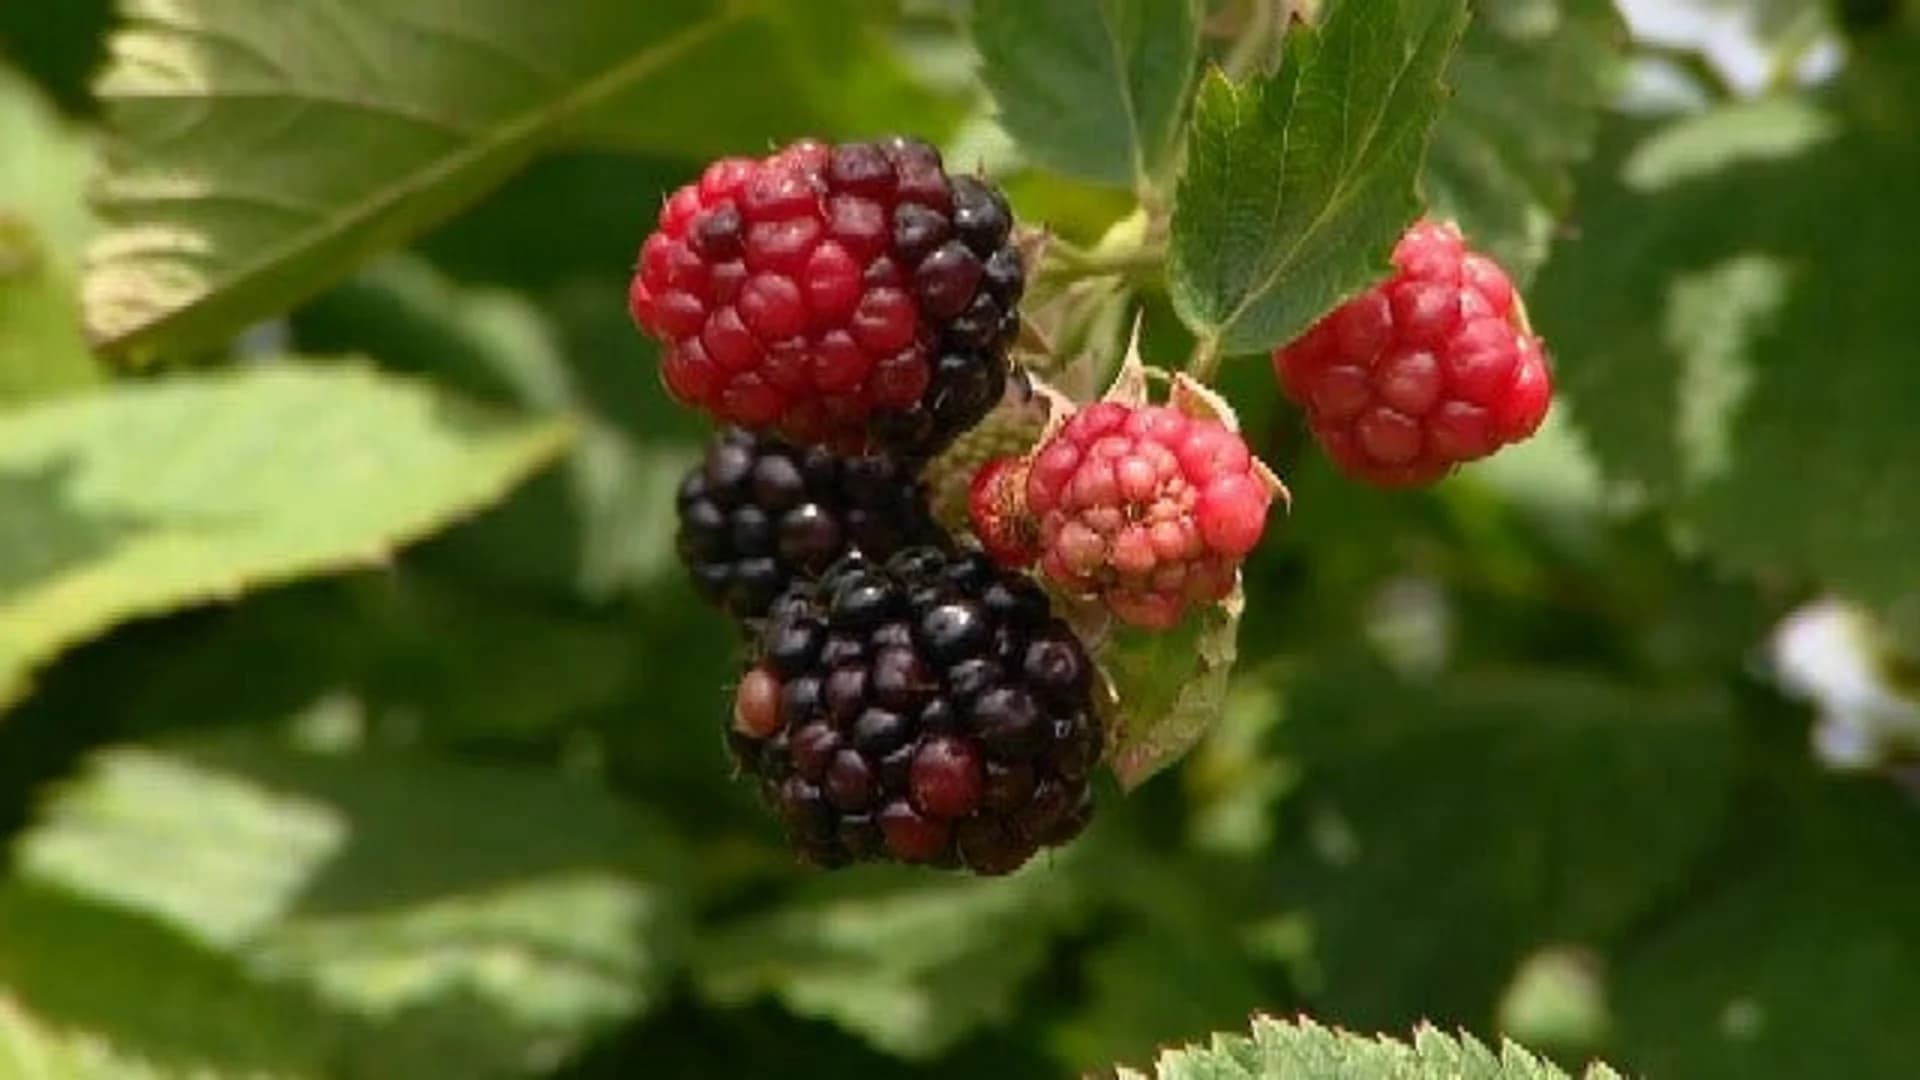 East End: Patty's Berries and Bunches in Mattituck